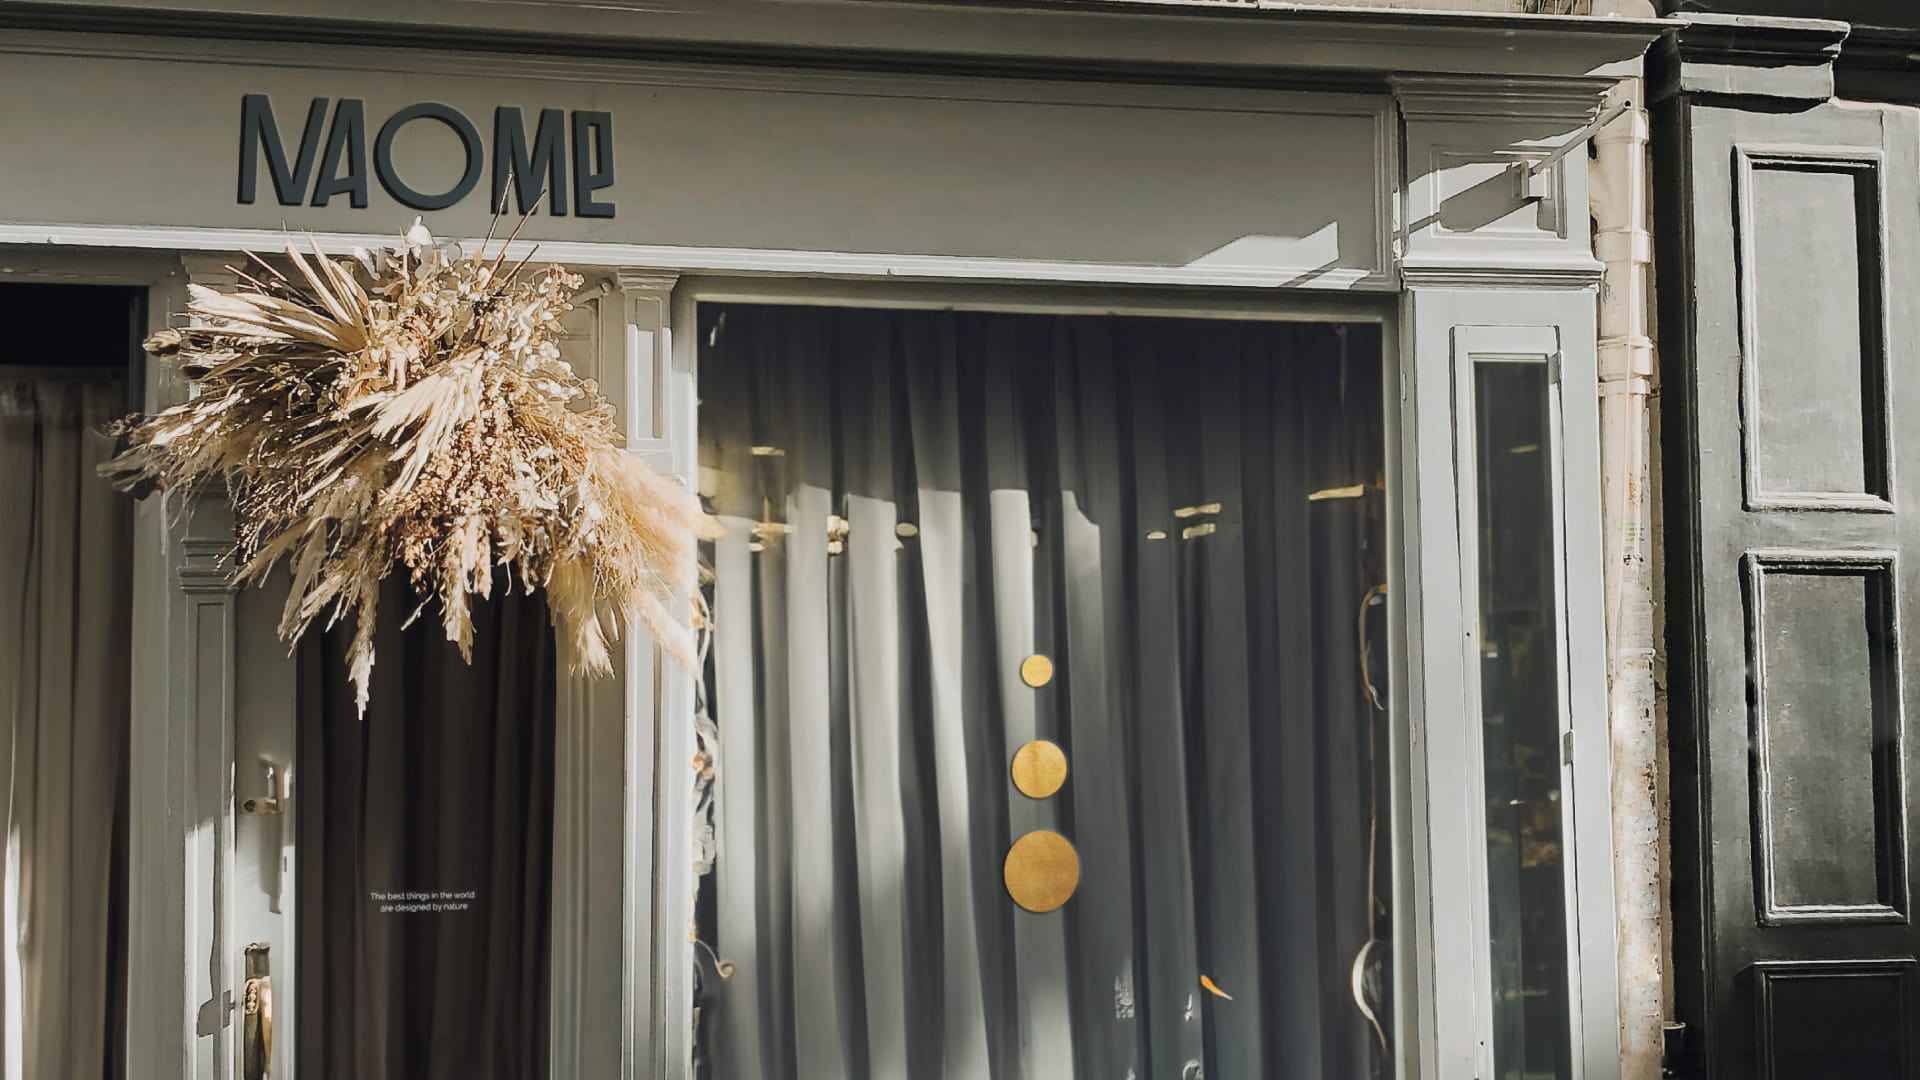 <strong>The identity of the American curtain brand Naome</strong>